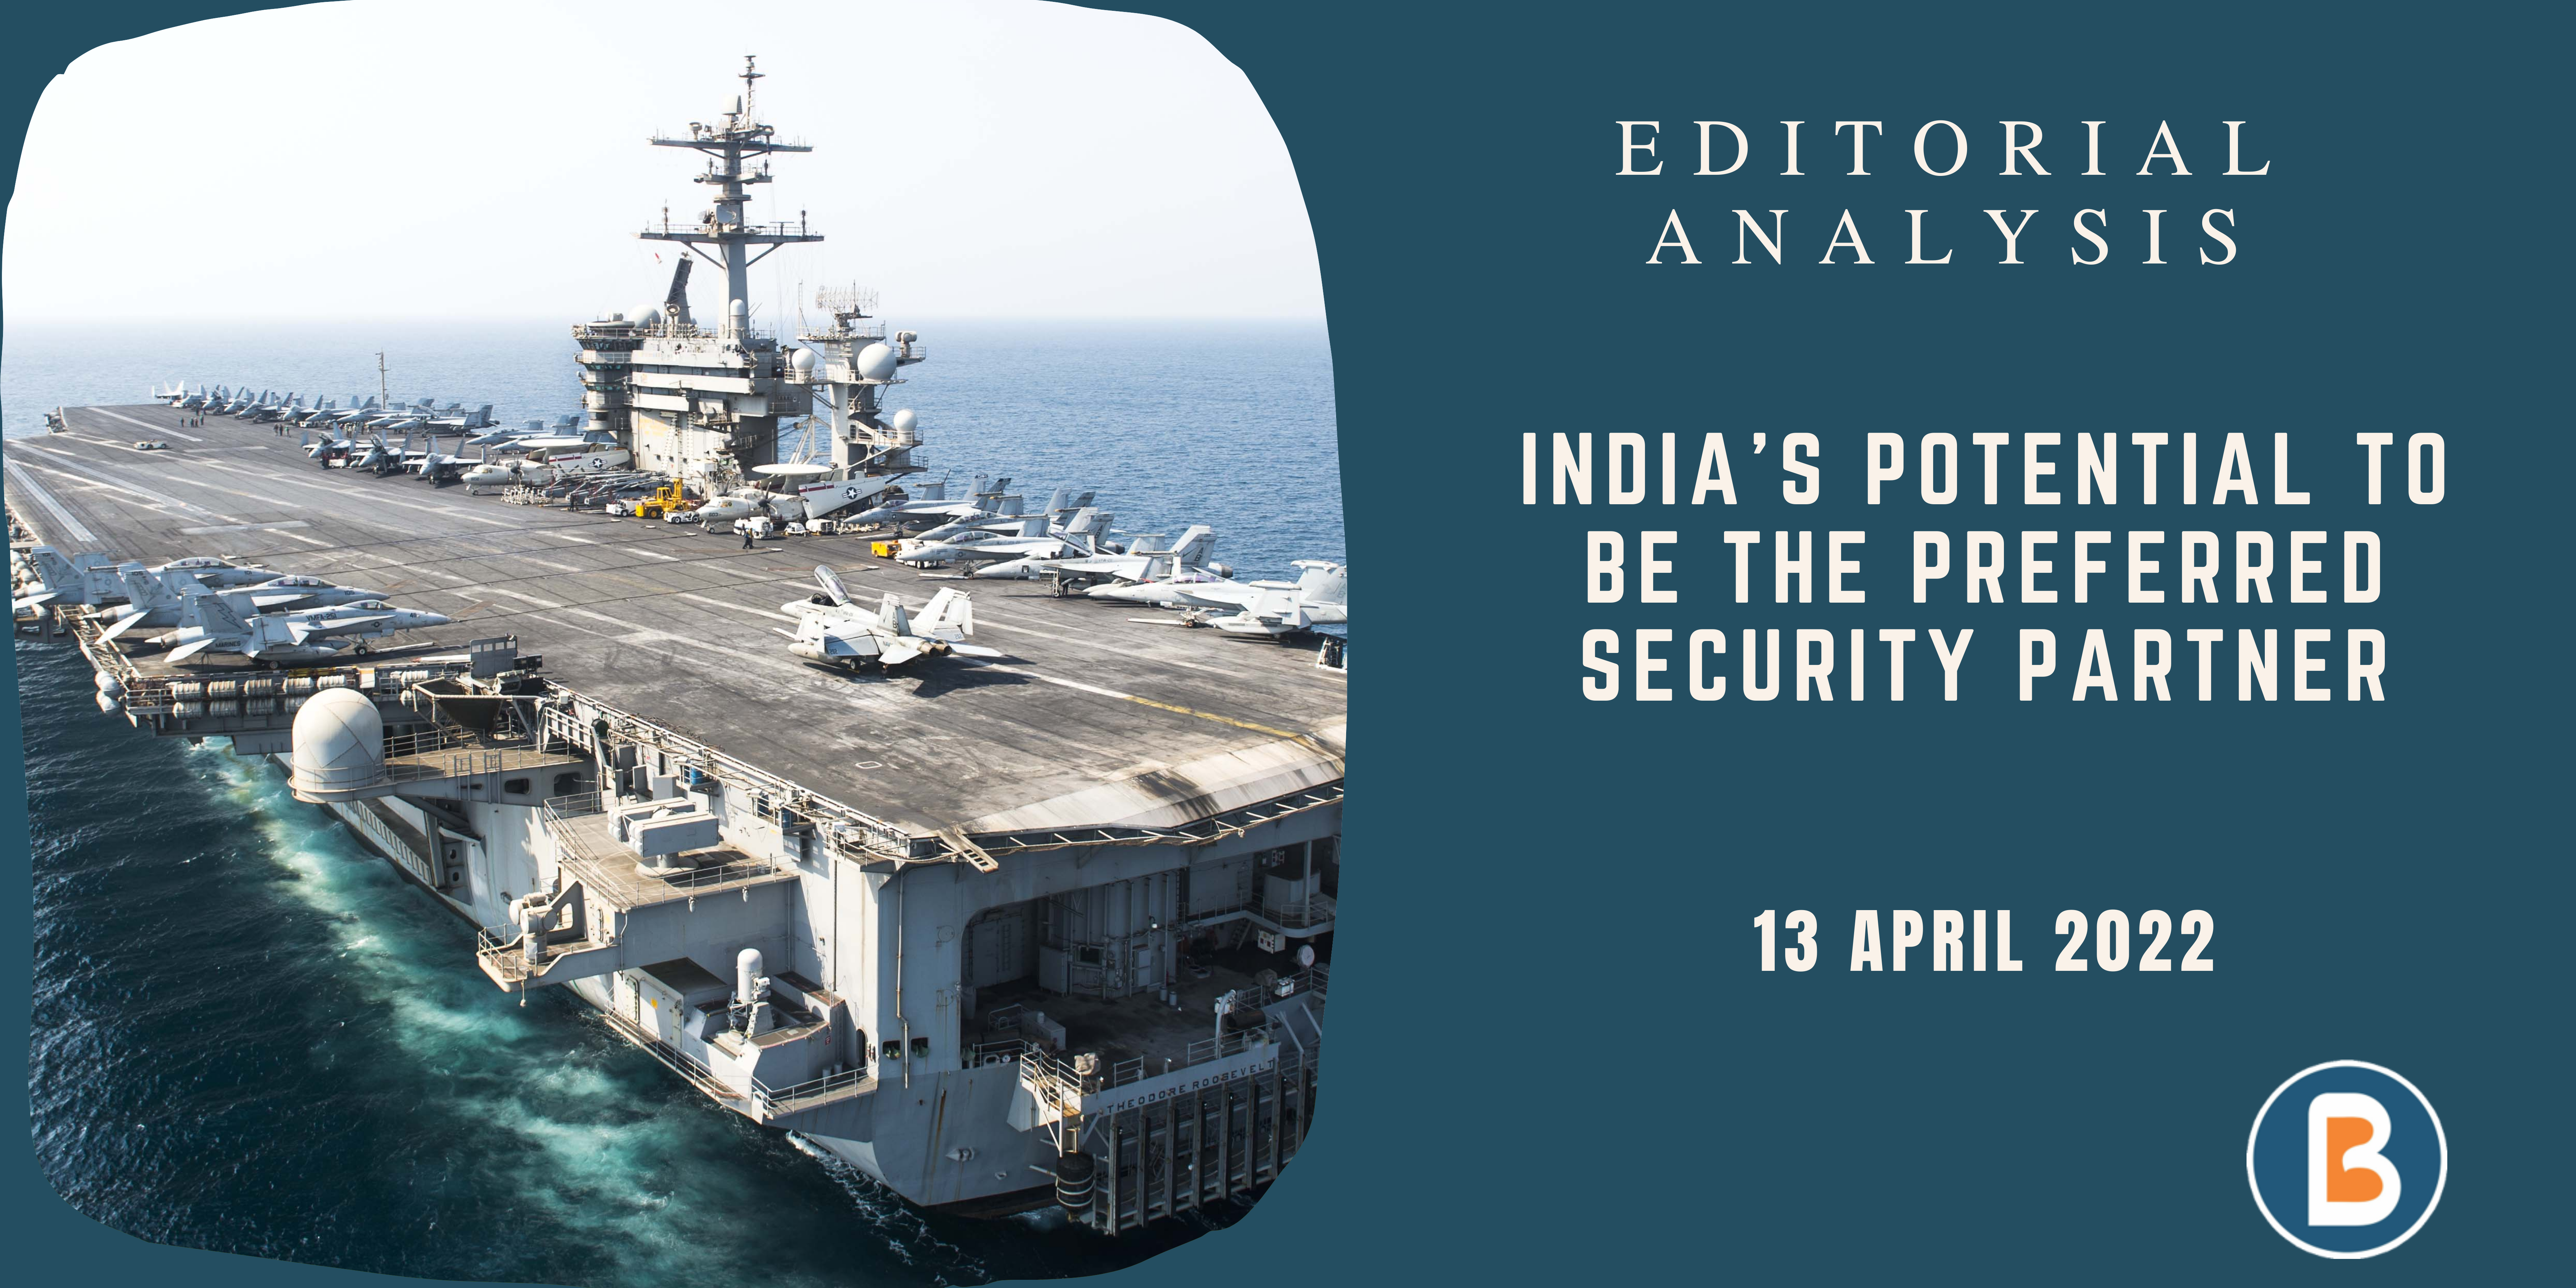 Editorial Analysis for UPSC - India’s Potential to be the Preferred Security Partner